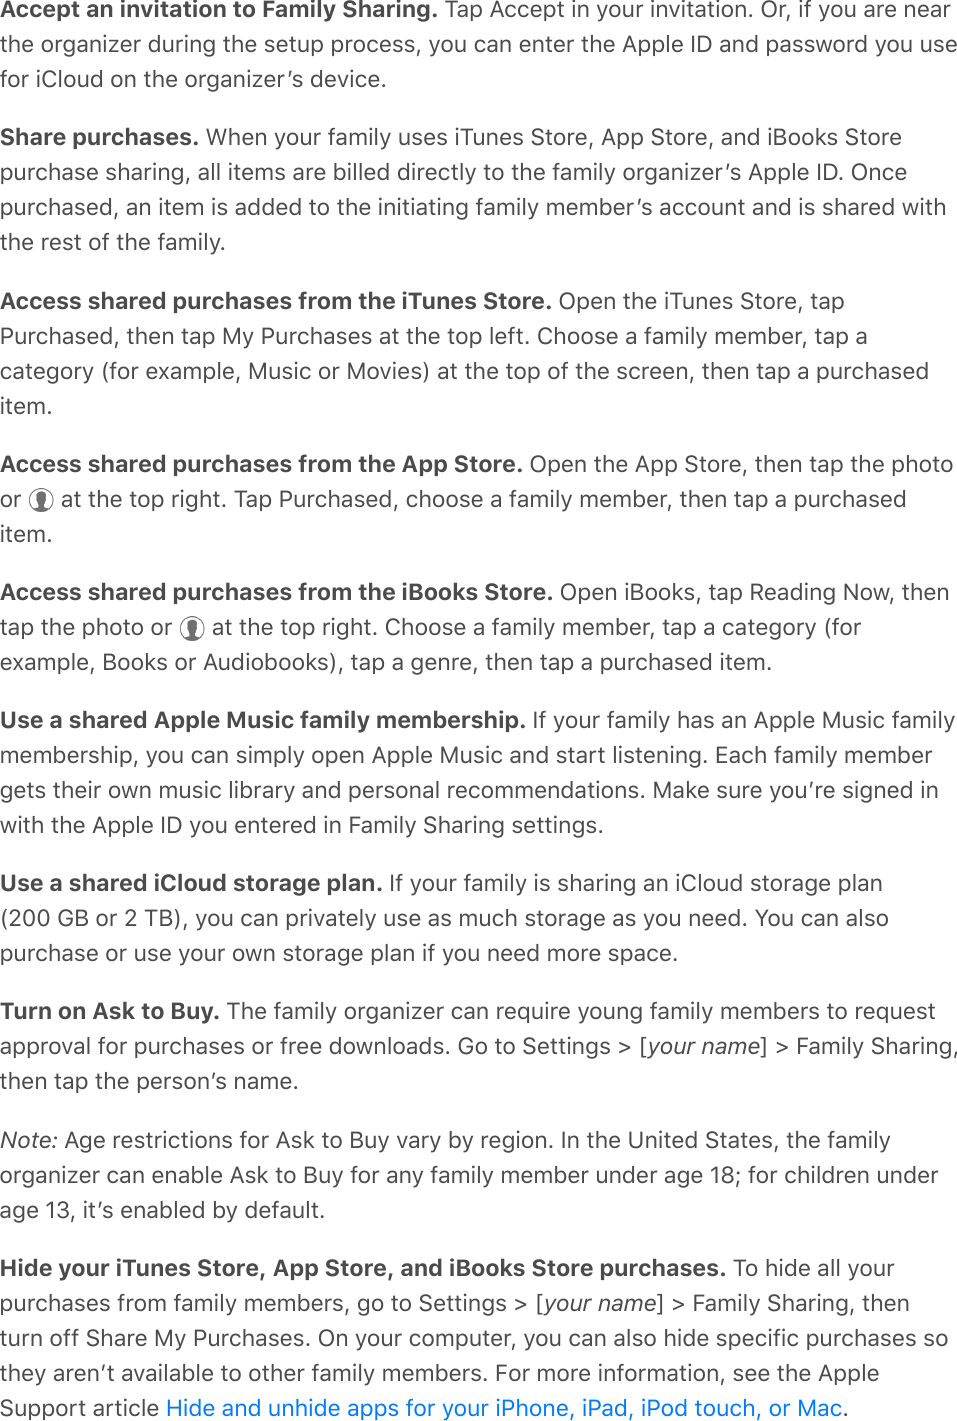 Accept an invitation to Family Sharing. Tap Accept in your invitation. Or, if you are nearthe organizer during the setup process, you can enter the Apple ID and password you usefor iCloud on the organizerʼs device.Share purchases. When your family uses iTunes Store, App Store, and iBooks Storepurchase sharing, all items are billed directly to the family organizerʼs Apple ID. Oncepurchased, an item is added to the initiating family memberʼs account and is shared withthe rest of the family.Access shared purchases from the iTunes Store. Open the iTunes Store, tapPurchased, then tap My Purchases at the top left. Choose a family member, tap acategory (for example, Music or Movies) at the top of the screen, then tap a purchaseditem.Access shared purchases from the App Store. Open the App Store, then tap the photoor   at the top right. Tap Purchased, choose a family member, then tap a purchaseditem.Access shared purchases from the iBooks Store. Open iBooks, tap Reading Now, thentap the photo or   at the top right. Choose a family member, tap a category (forexample, Books or Audiobooks), tap a genre, then tap a purchased item.Use a shared Apple Music family membership. If your family has an Apple Music familymembership, you can simply open Apple Music and start listening. Each family membergets their own music library and personal recommendations. Make sure youʼre signed inwith the Apple ID you entered in Family Sharing settings.Use a shared iCloud storage plan. If your family is sharing an iCloud storage plan(200 GB or 2 TB), you can privately use as much storage as you need. You can alsopurchase or use your own storage plan if you need more space.Turn on Ask to Buy. The family organizer can require young family members to requestapproval for purchases or free downloads. Go to Settings &gt; [your name] &gt; Family Sharing,then tap the personʼs name.Note: Age restrictions for Ask to Buy vary by region. In the United States, the familyorganizer can enable Ask to Buy for any family member under age 18; for children underage 13, itʼs enabled by default.Hide your iTunes Store, App Store, and iBooks Store purchases. To hide all yourpurchases from family members, go to Settings &gt; [your name] &gt; Family Sharing, thenturn off Share My Purchases. On your computer, you can also hide specific purchases sothey arenʼt available to other family members. For more information, see the AppleSupport article  .Hide and unhide apps for your iPhone, iPad, iPod touch, or Mac